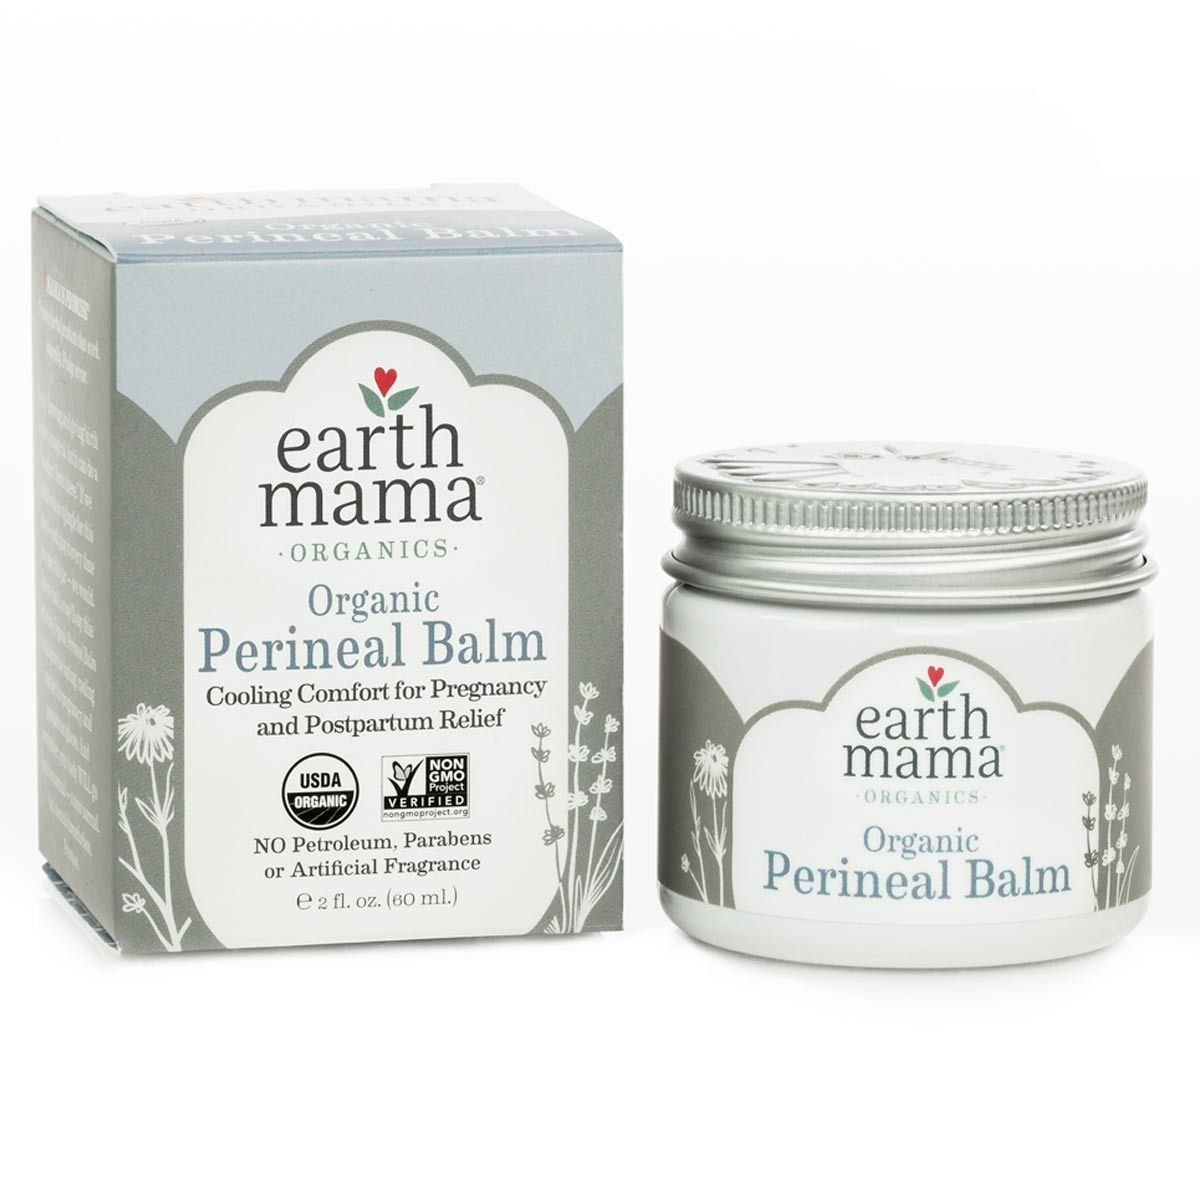 Primary image of Organic Perineal Balm